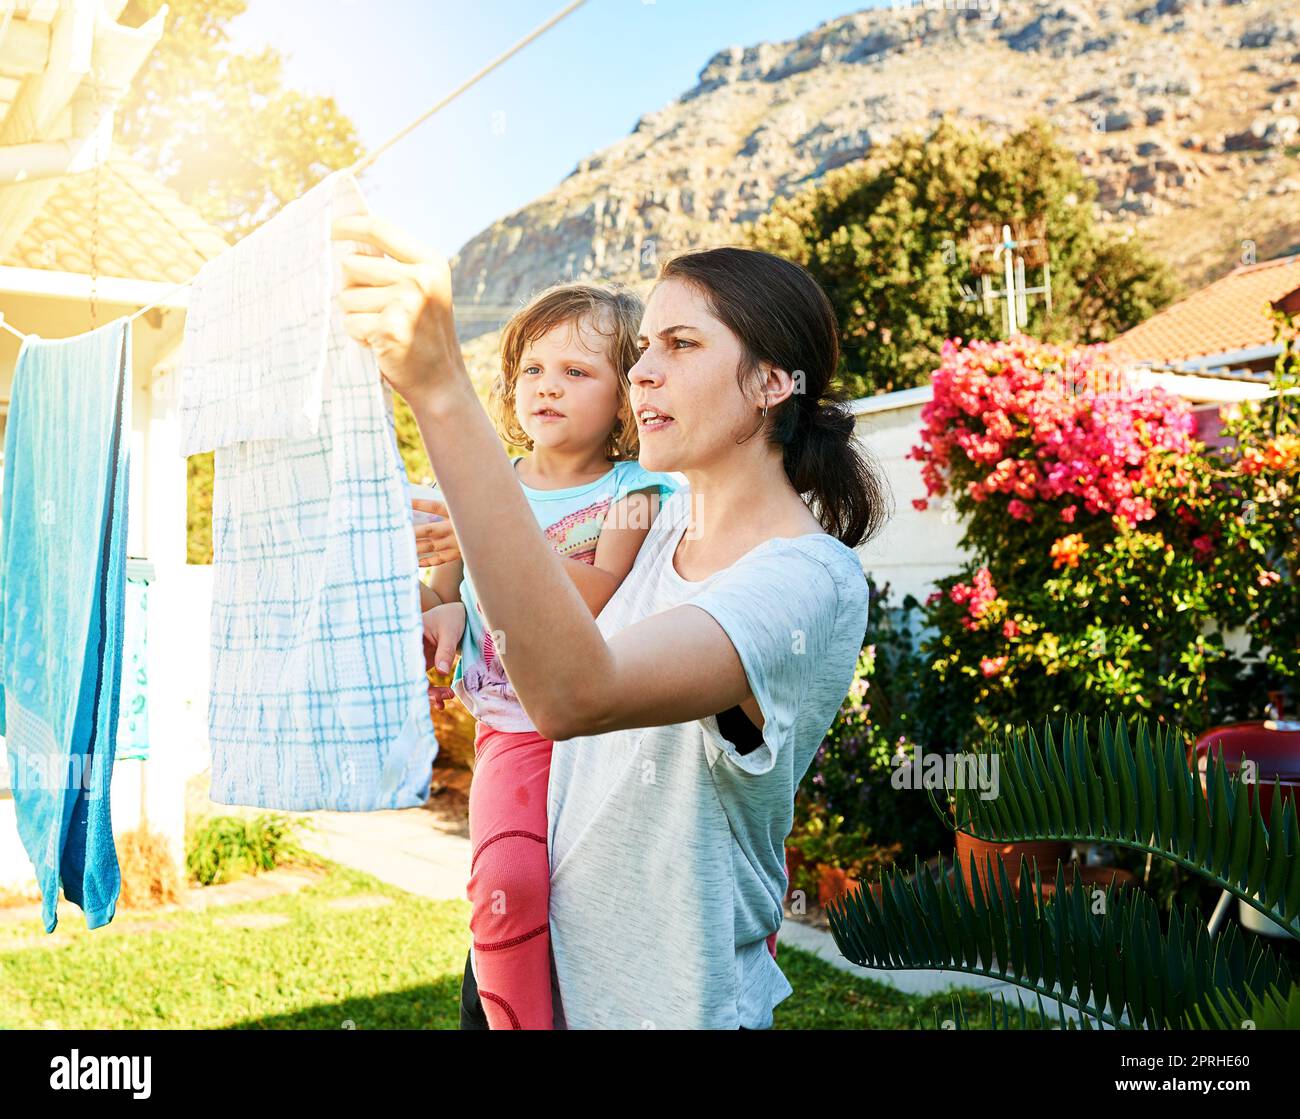 Getting to know moms job. a mother and daughter hanging up laundry together outside. Stock Photo